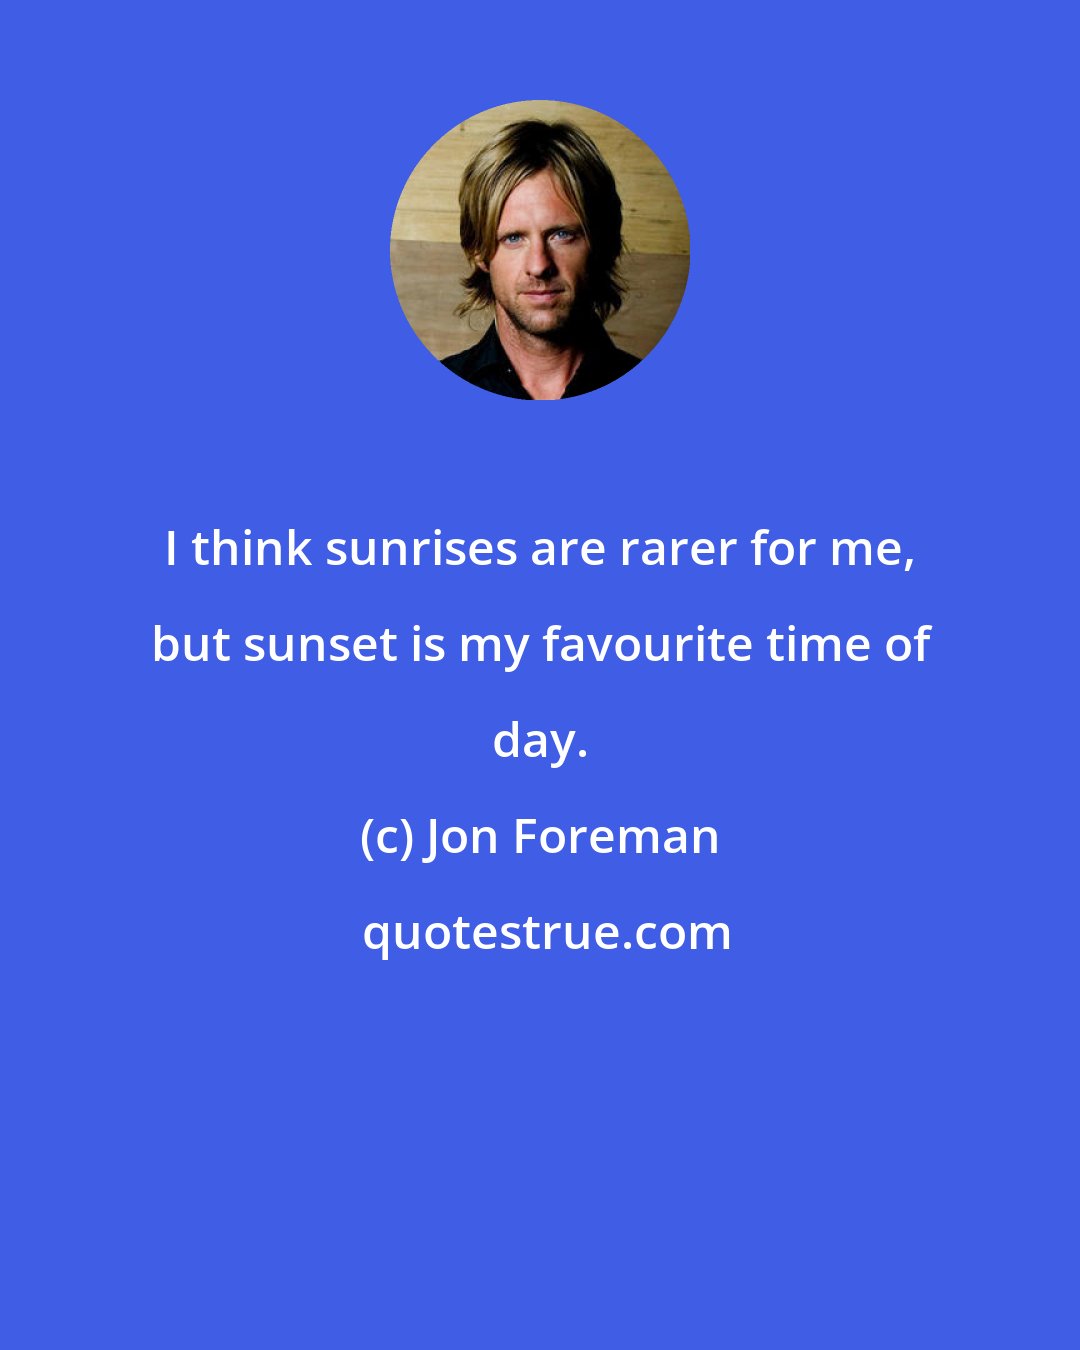 Jon Foreman: I think sunrises are rarer for me, but sunset is my favourite time of day.